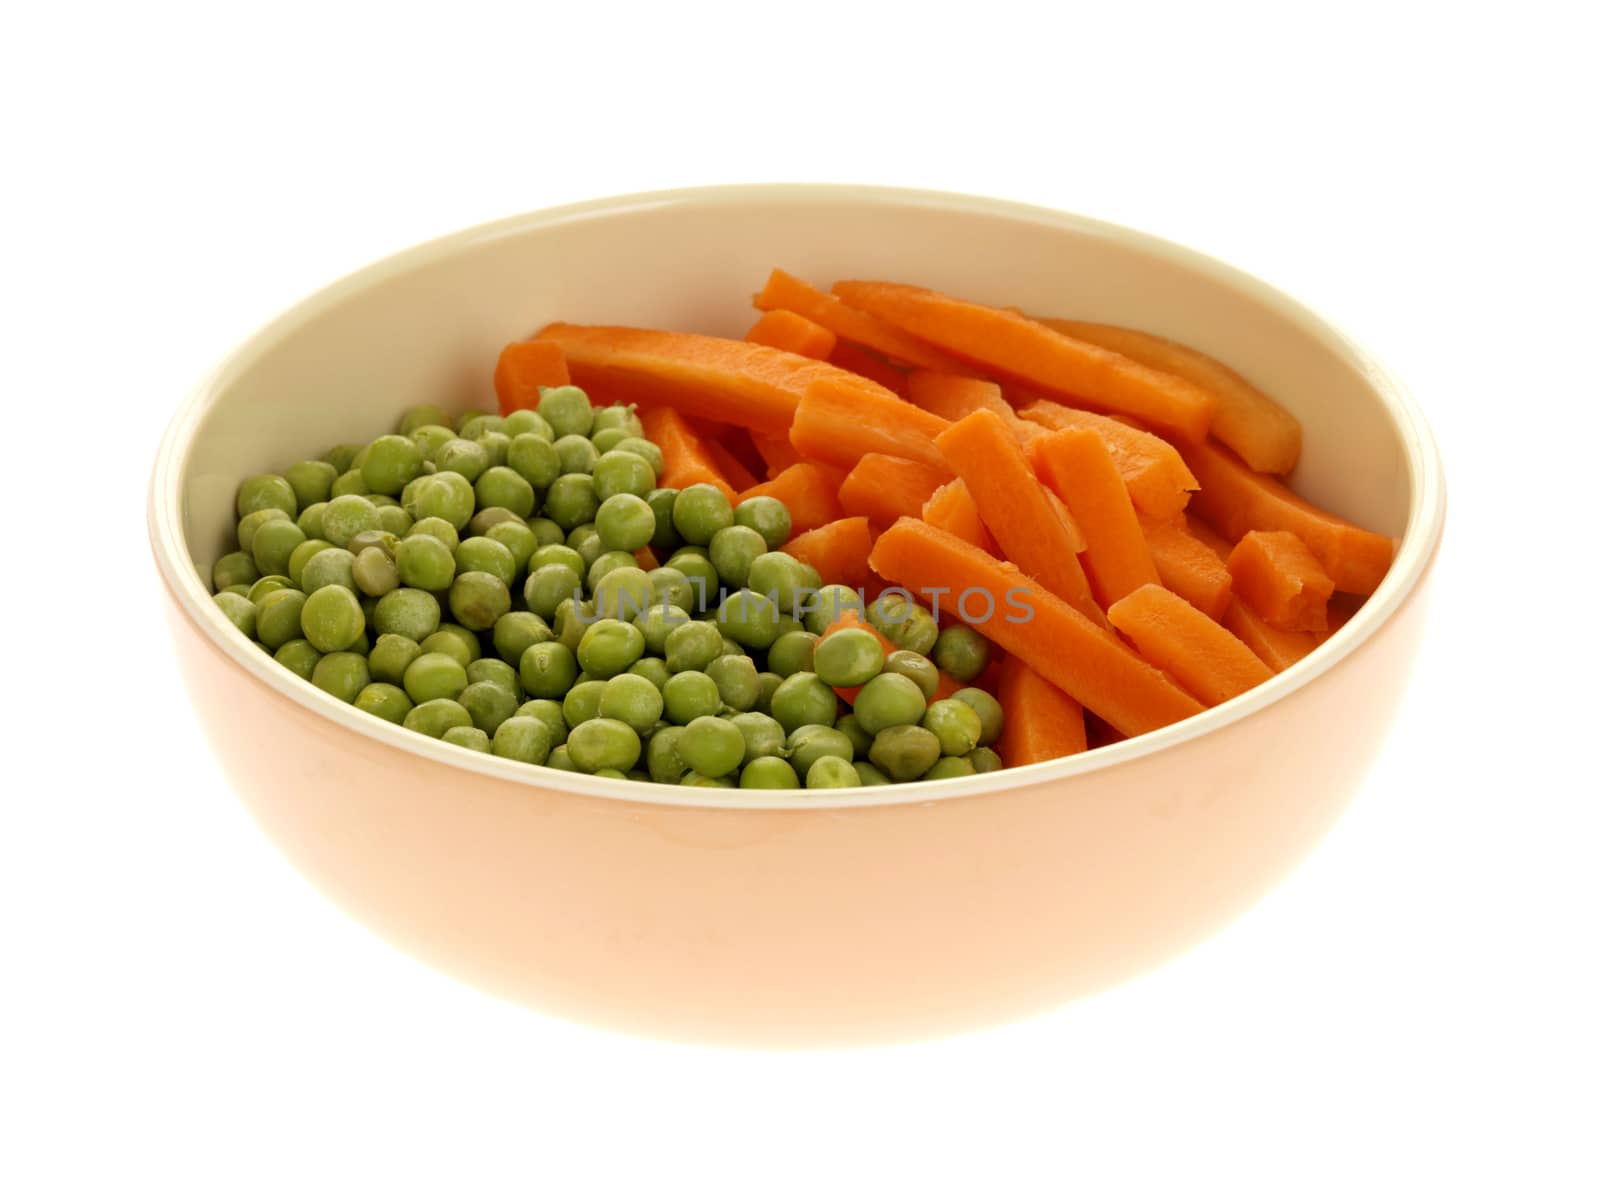 Carrots and Peas by Whiteboxmedia